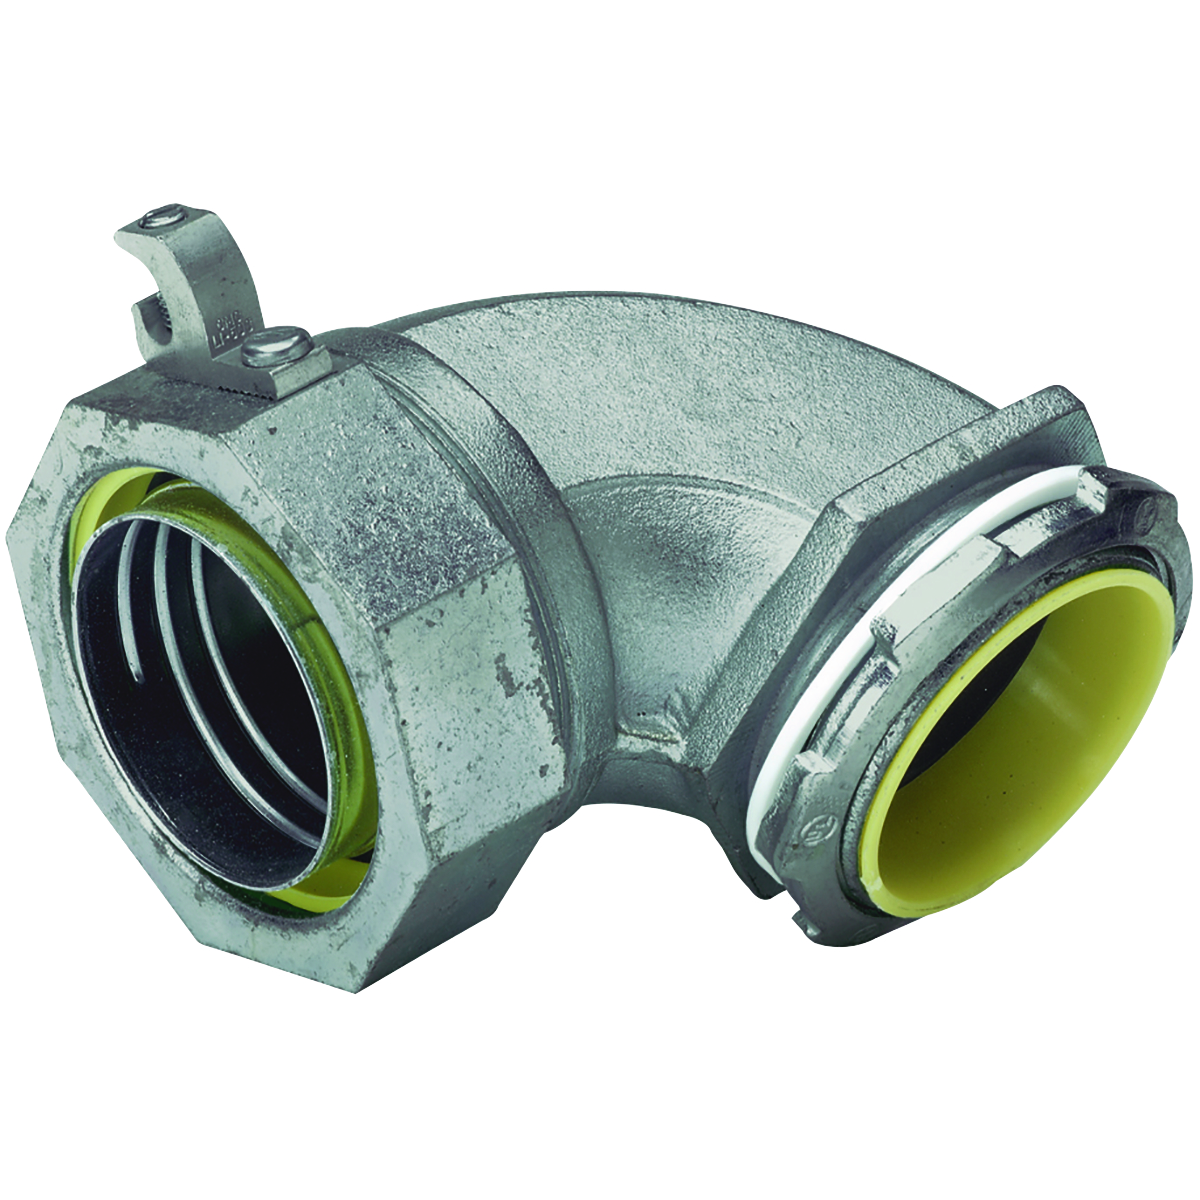 2 1/2" 90° LT CONNECTOR INSULATED GRD